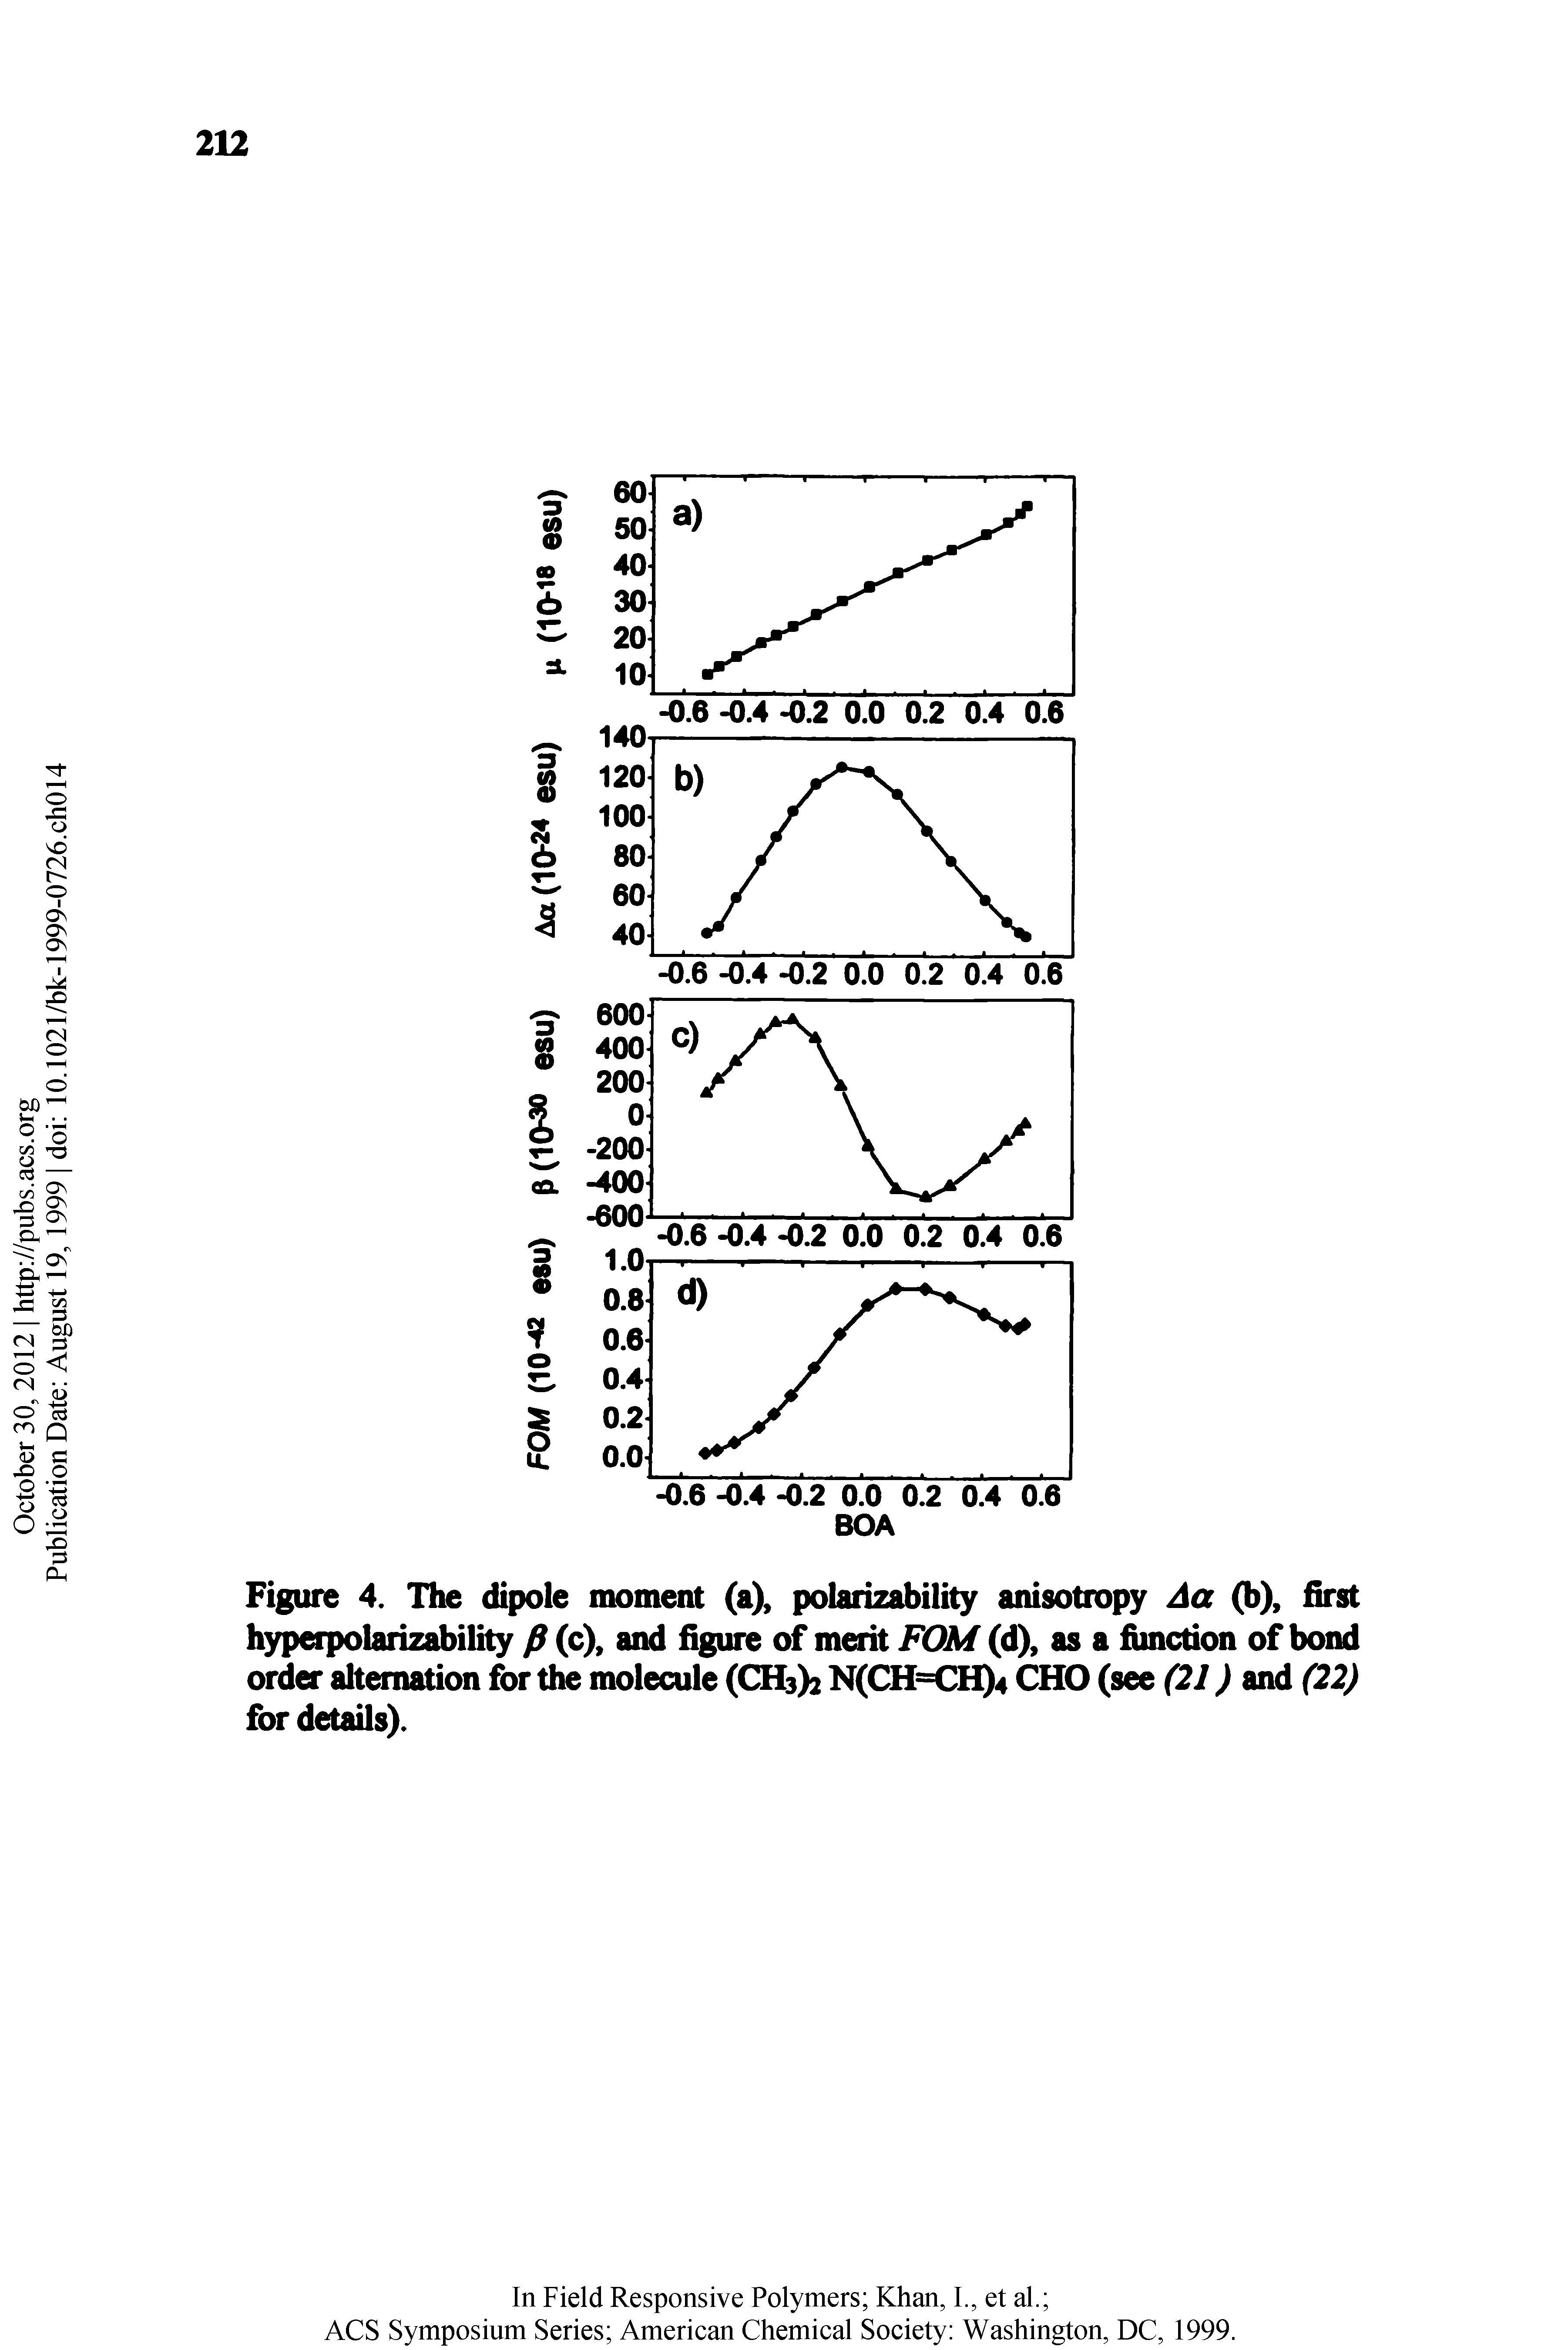 Figure 4. The dipole moment (aX polarizability anisotropy Aa Q>), first hypeipolarizability P (cX and figure of merit FOM (d), as a fimction of bond order alternation fi>r the molecule (CI%)2 N(CHK304 (see (27 and...